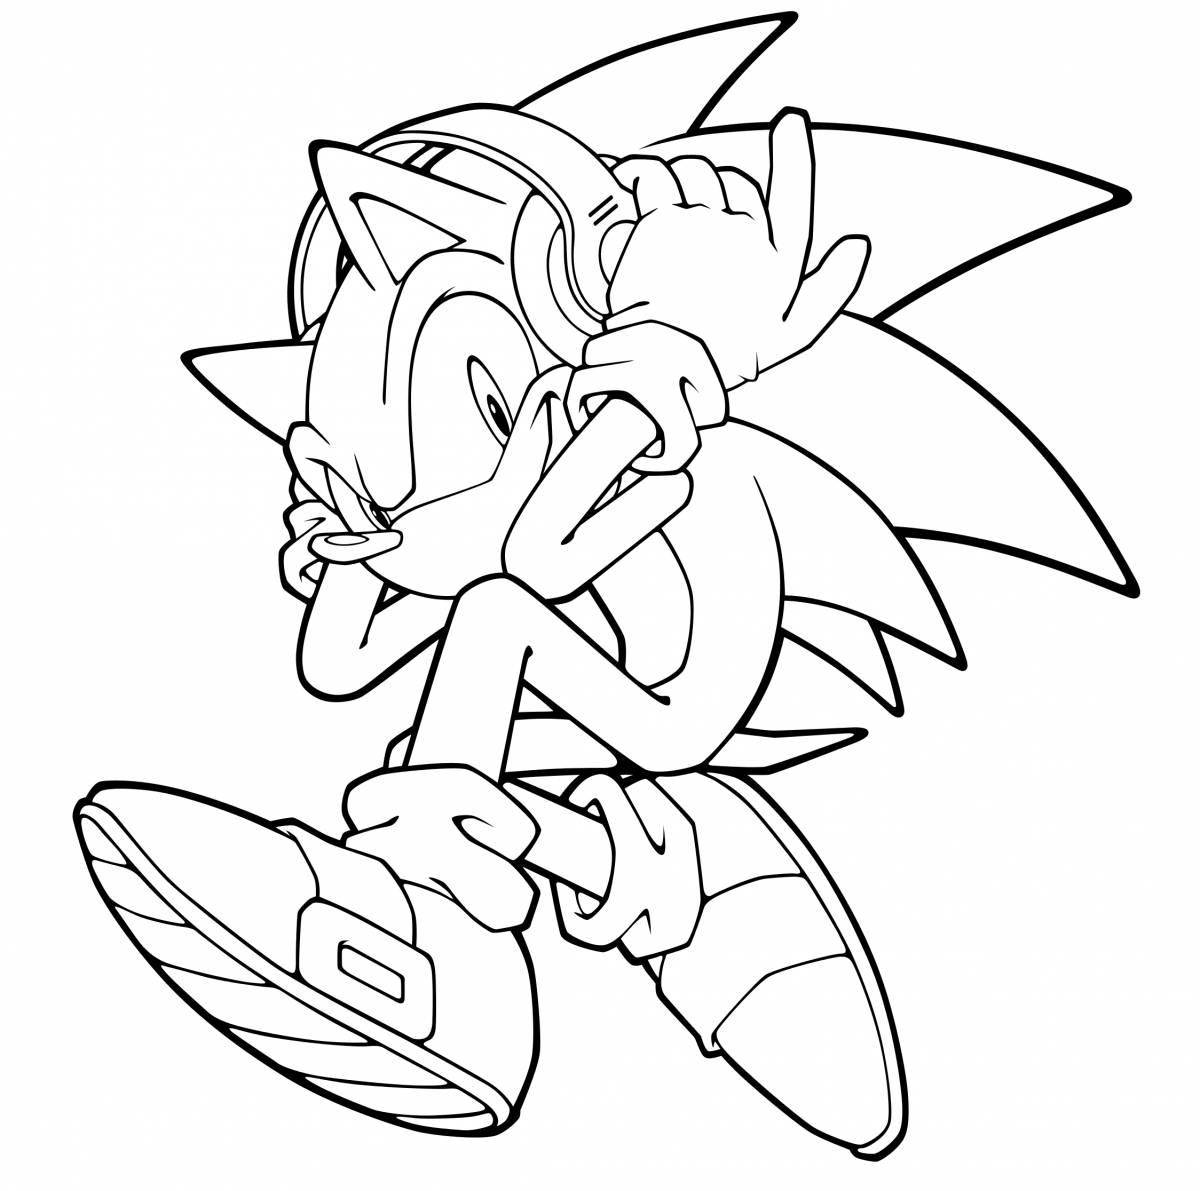 Merry Christmas sonic coloring book